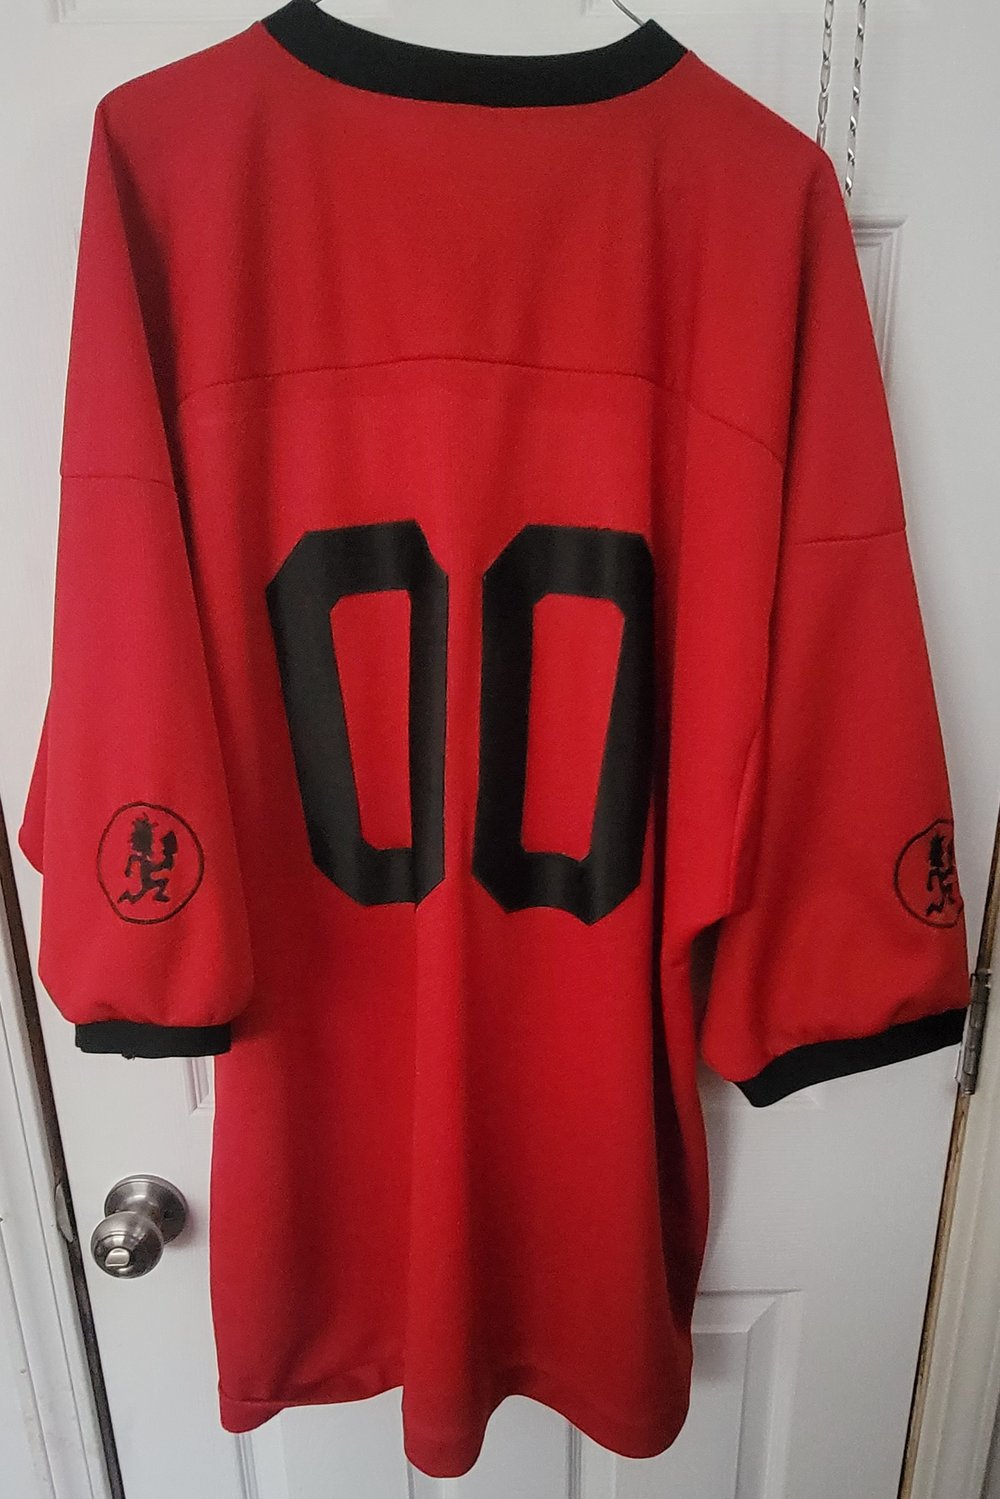 Psychopathic records 00 football jersey. 3xl